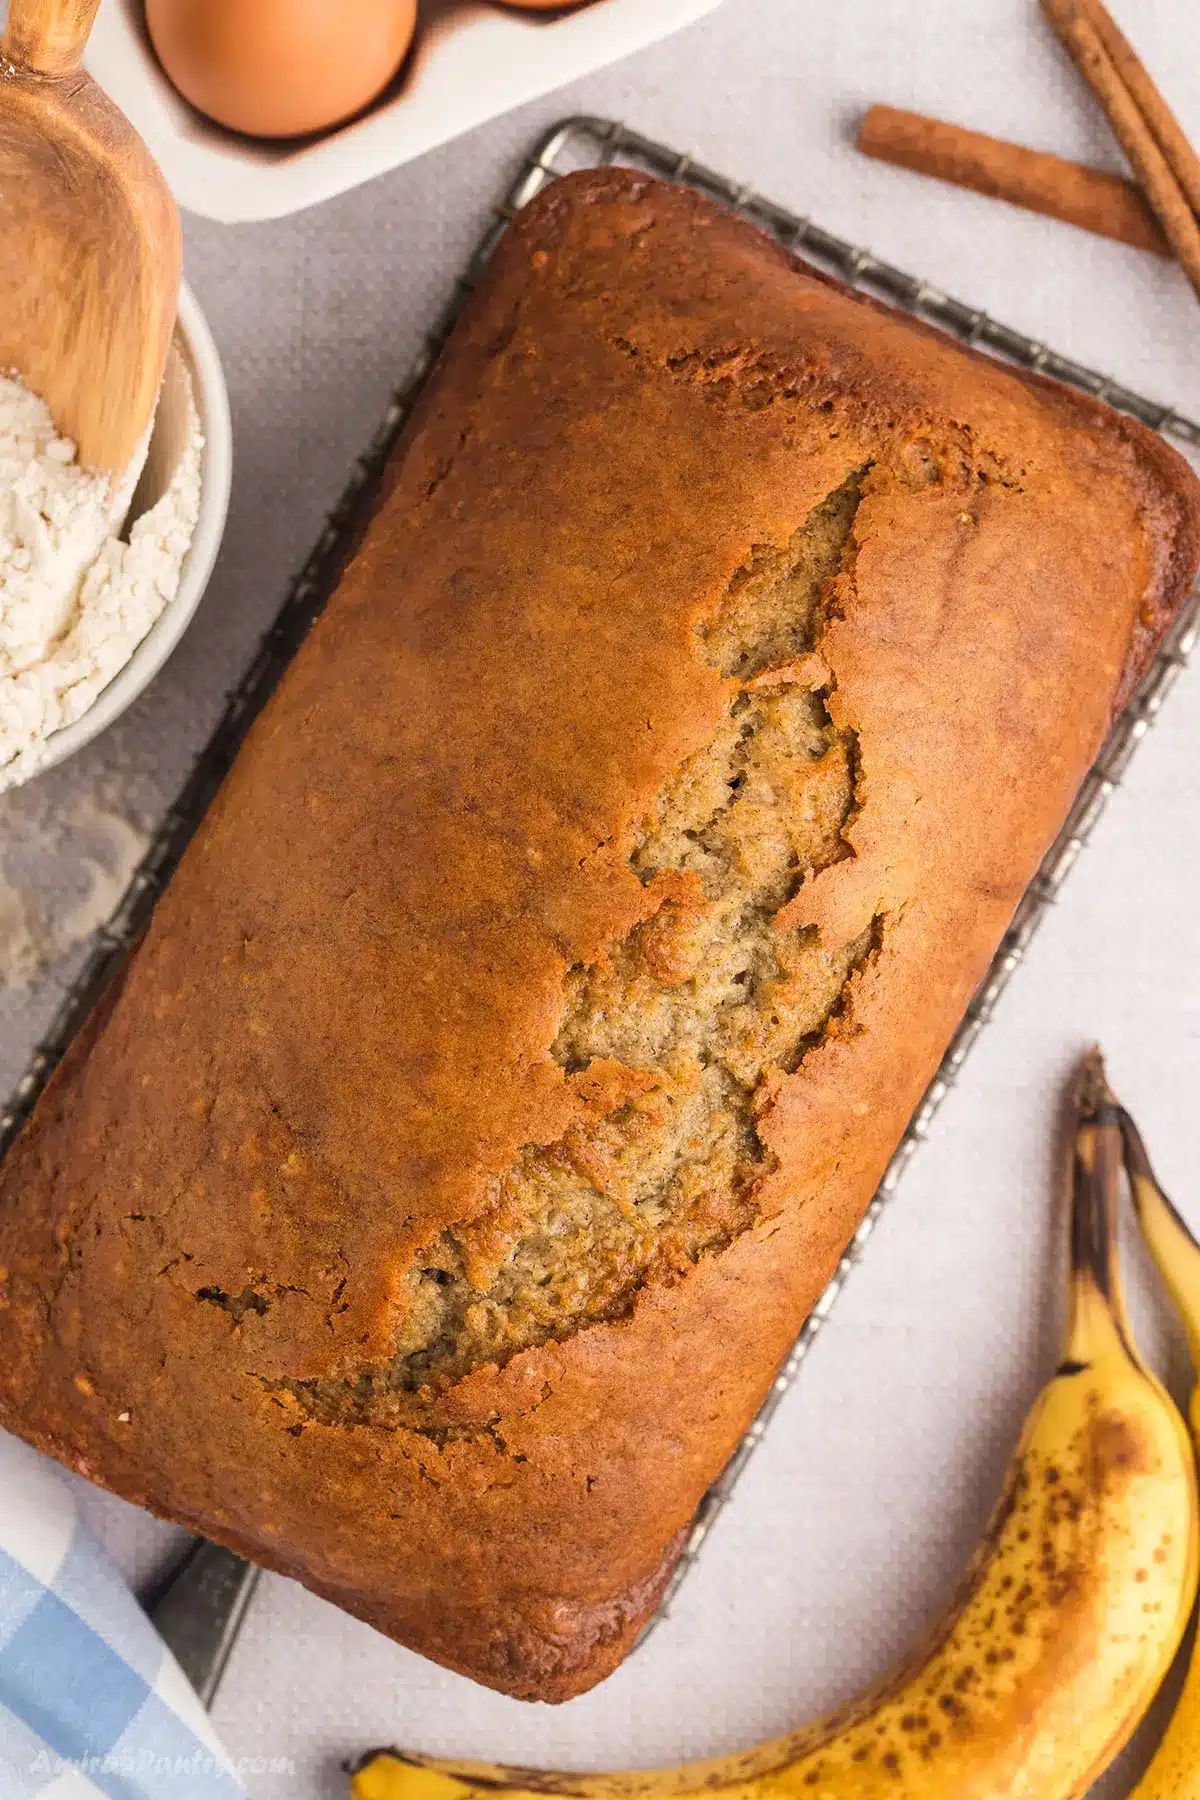 Banana bread on a counter with brown bananas on the side.